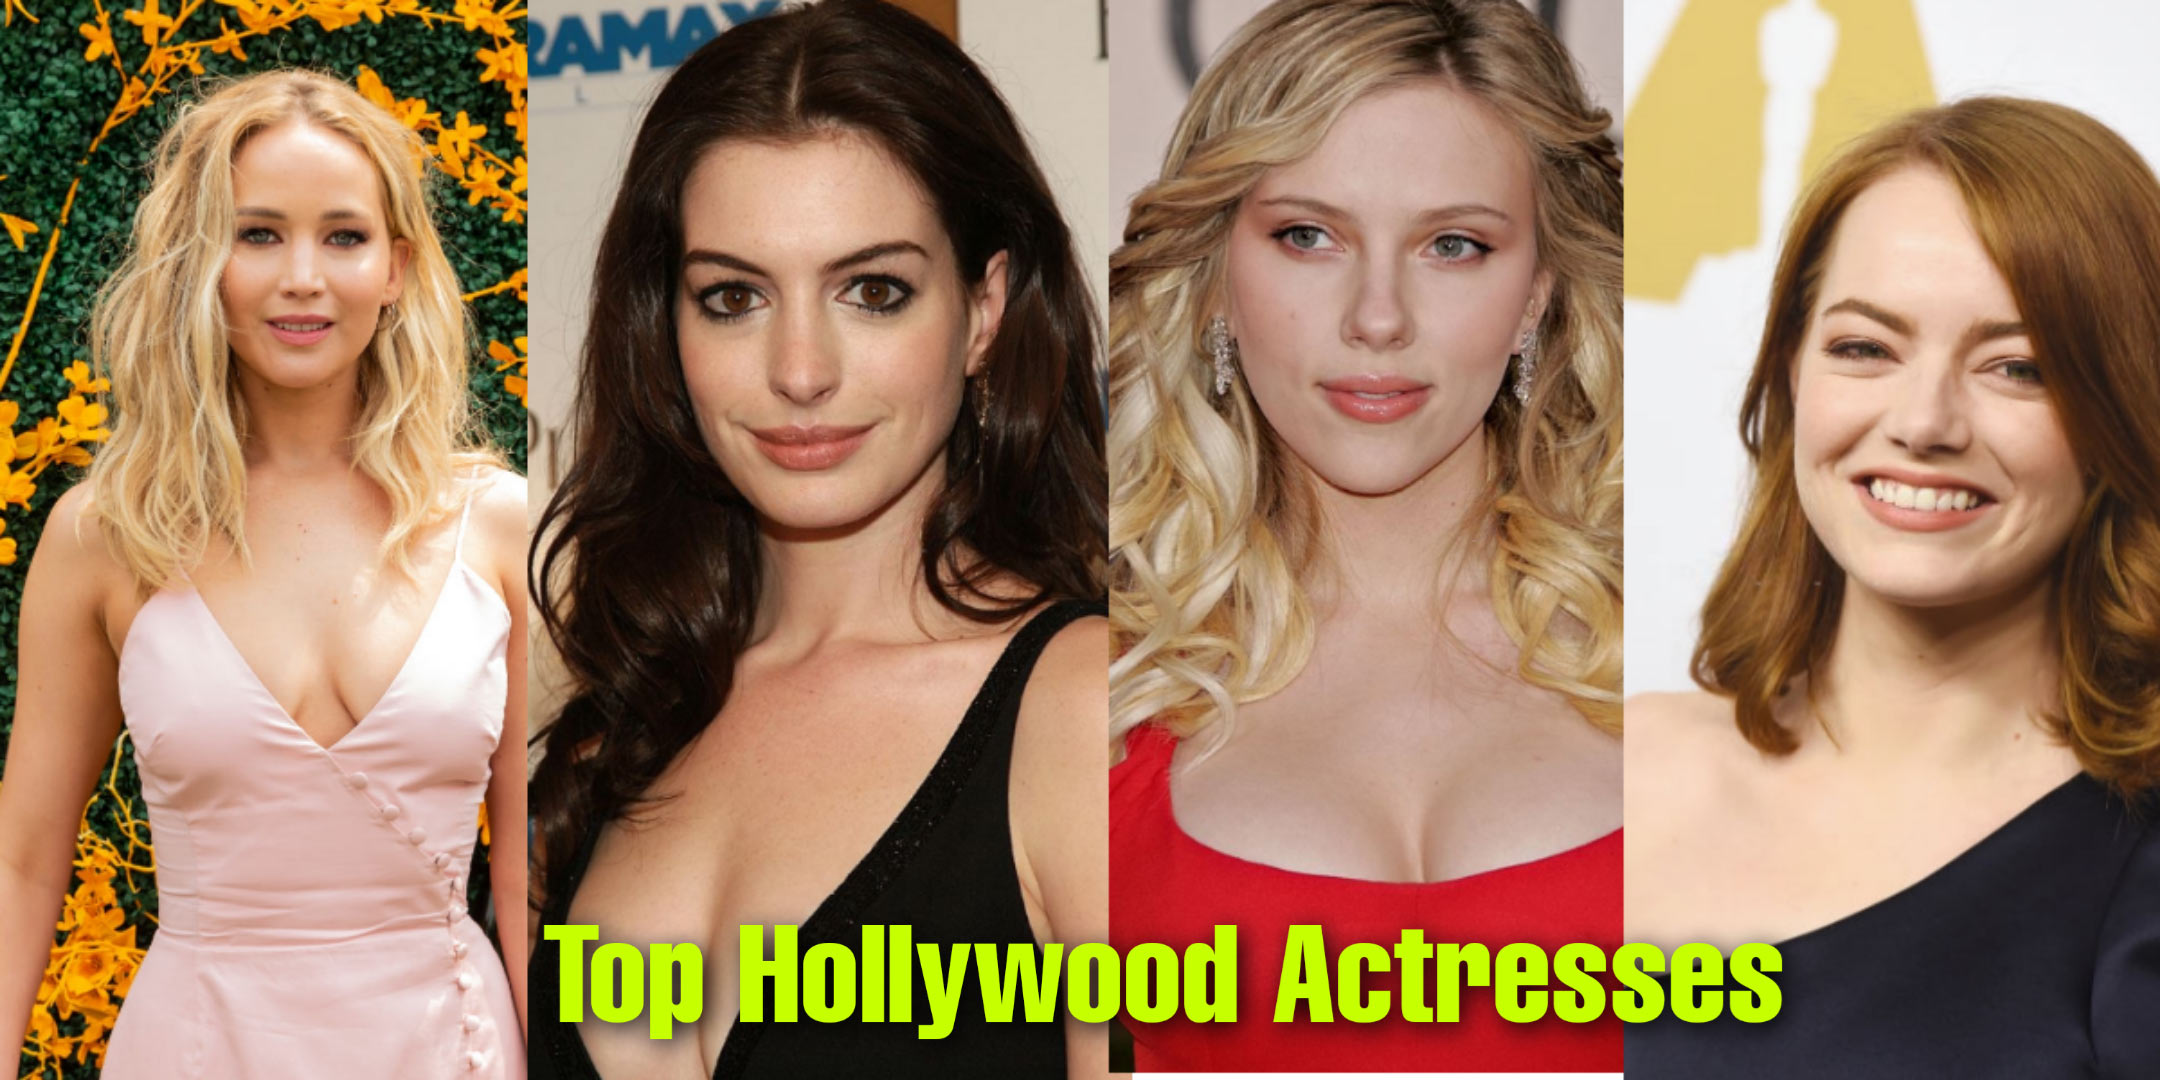 Top 10 Hollywood Actresses Beauty Brains And Highest Paid 2020 4427